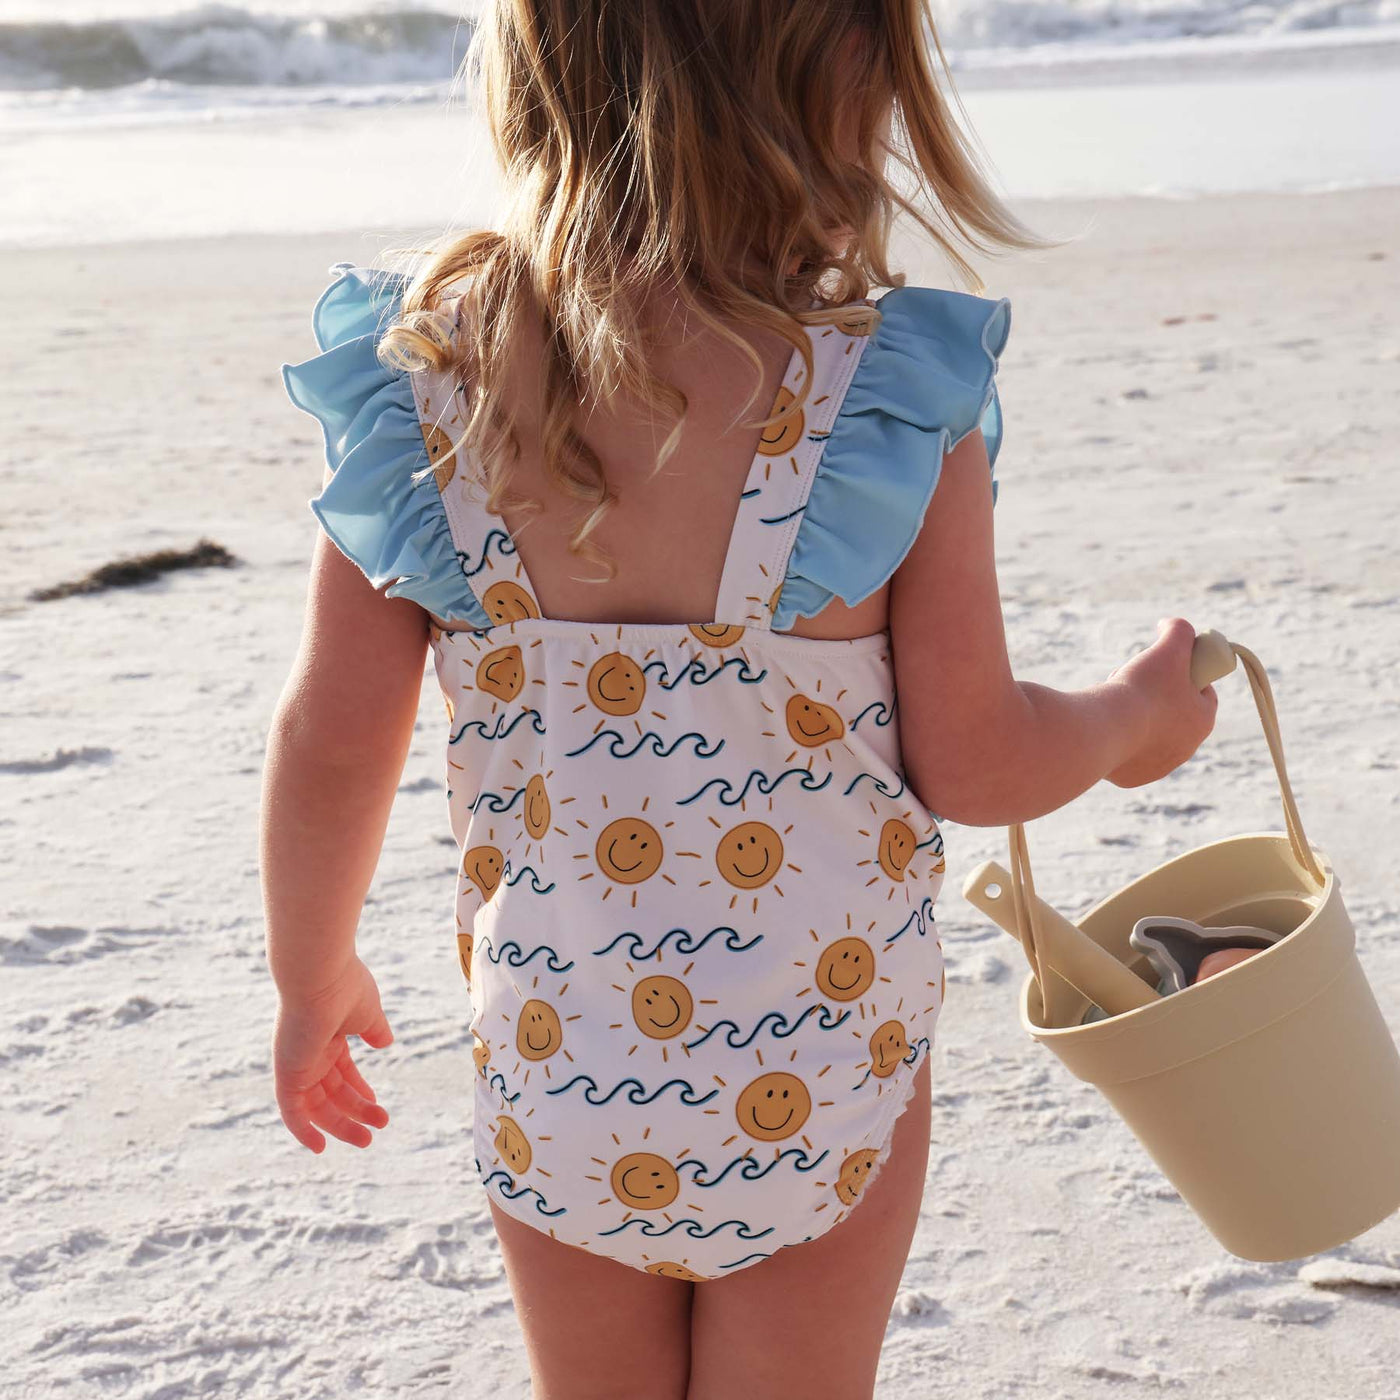 ruffle shoulder swimsuit for kids with waves and suns